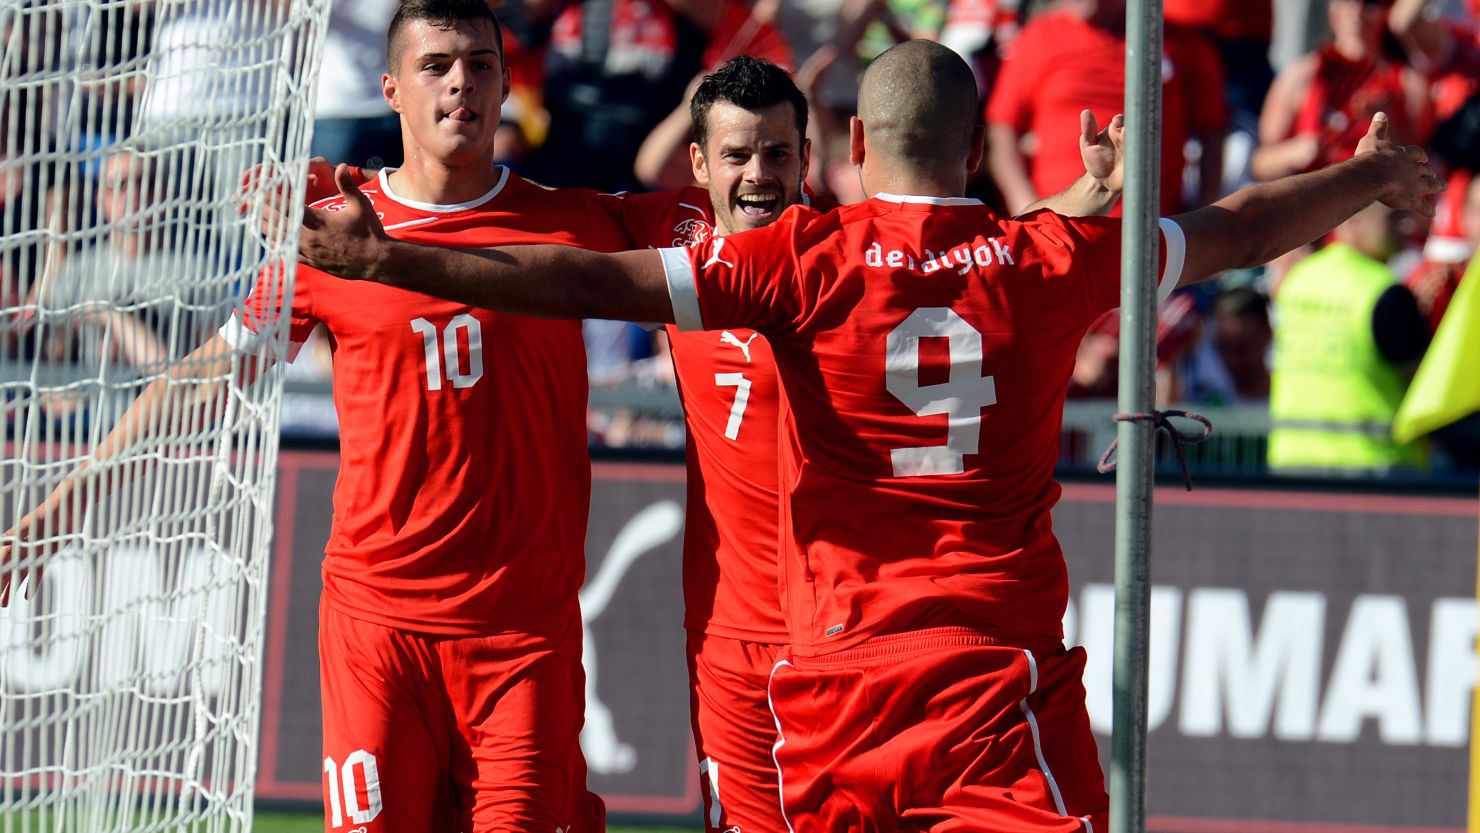 Eren Derdiyok gets the congratulations of teammates on his way to a hat-trick in Switzerland's 5-3 win over Germany.